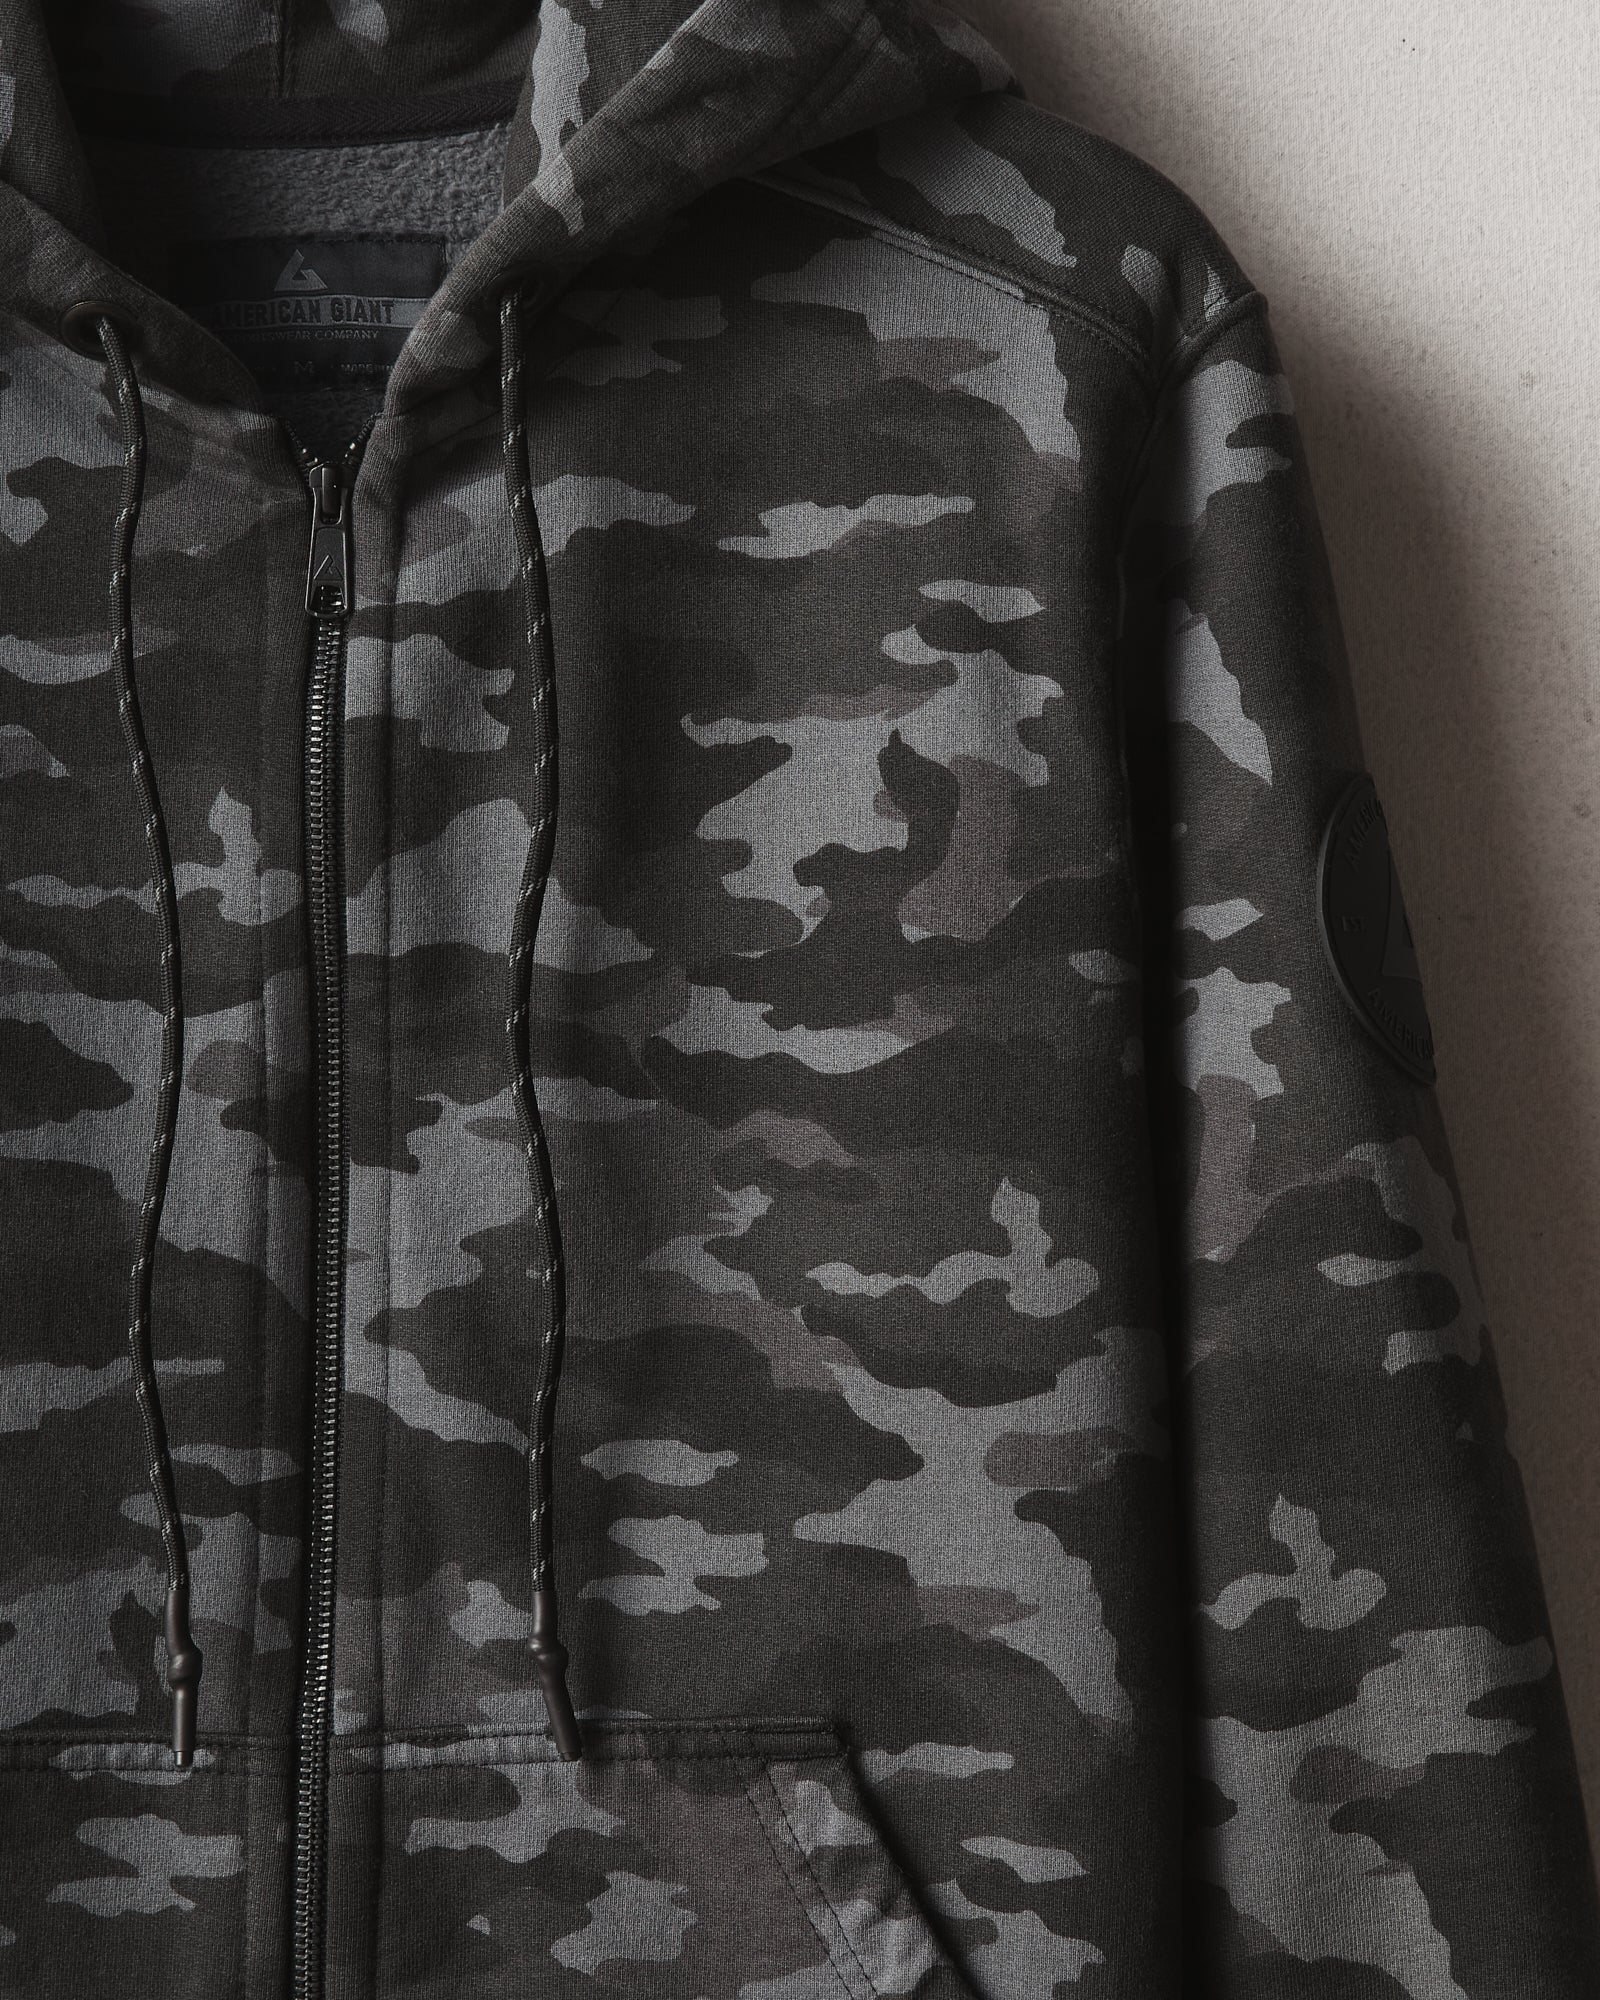 50 Shades of Gray: The Evolution of Camo and a Throwback to Solid Colors -  The Shooter's Log